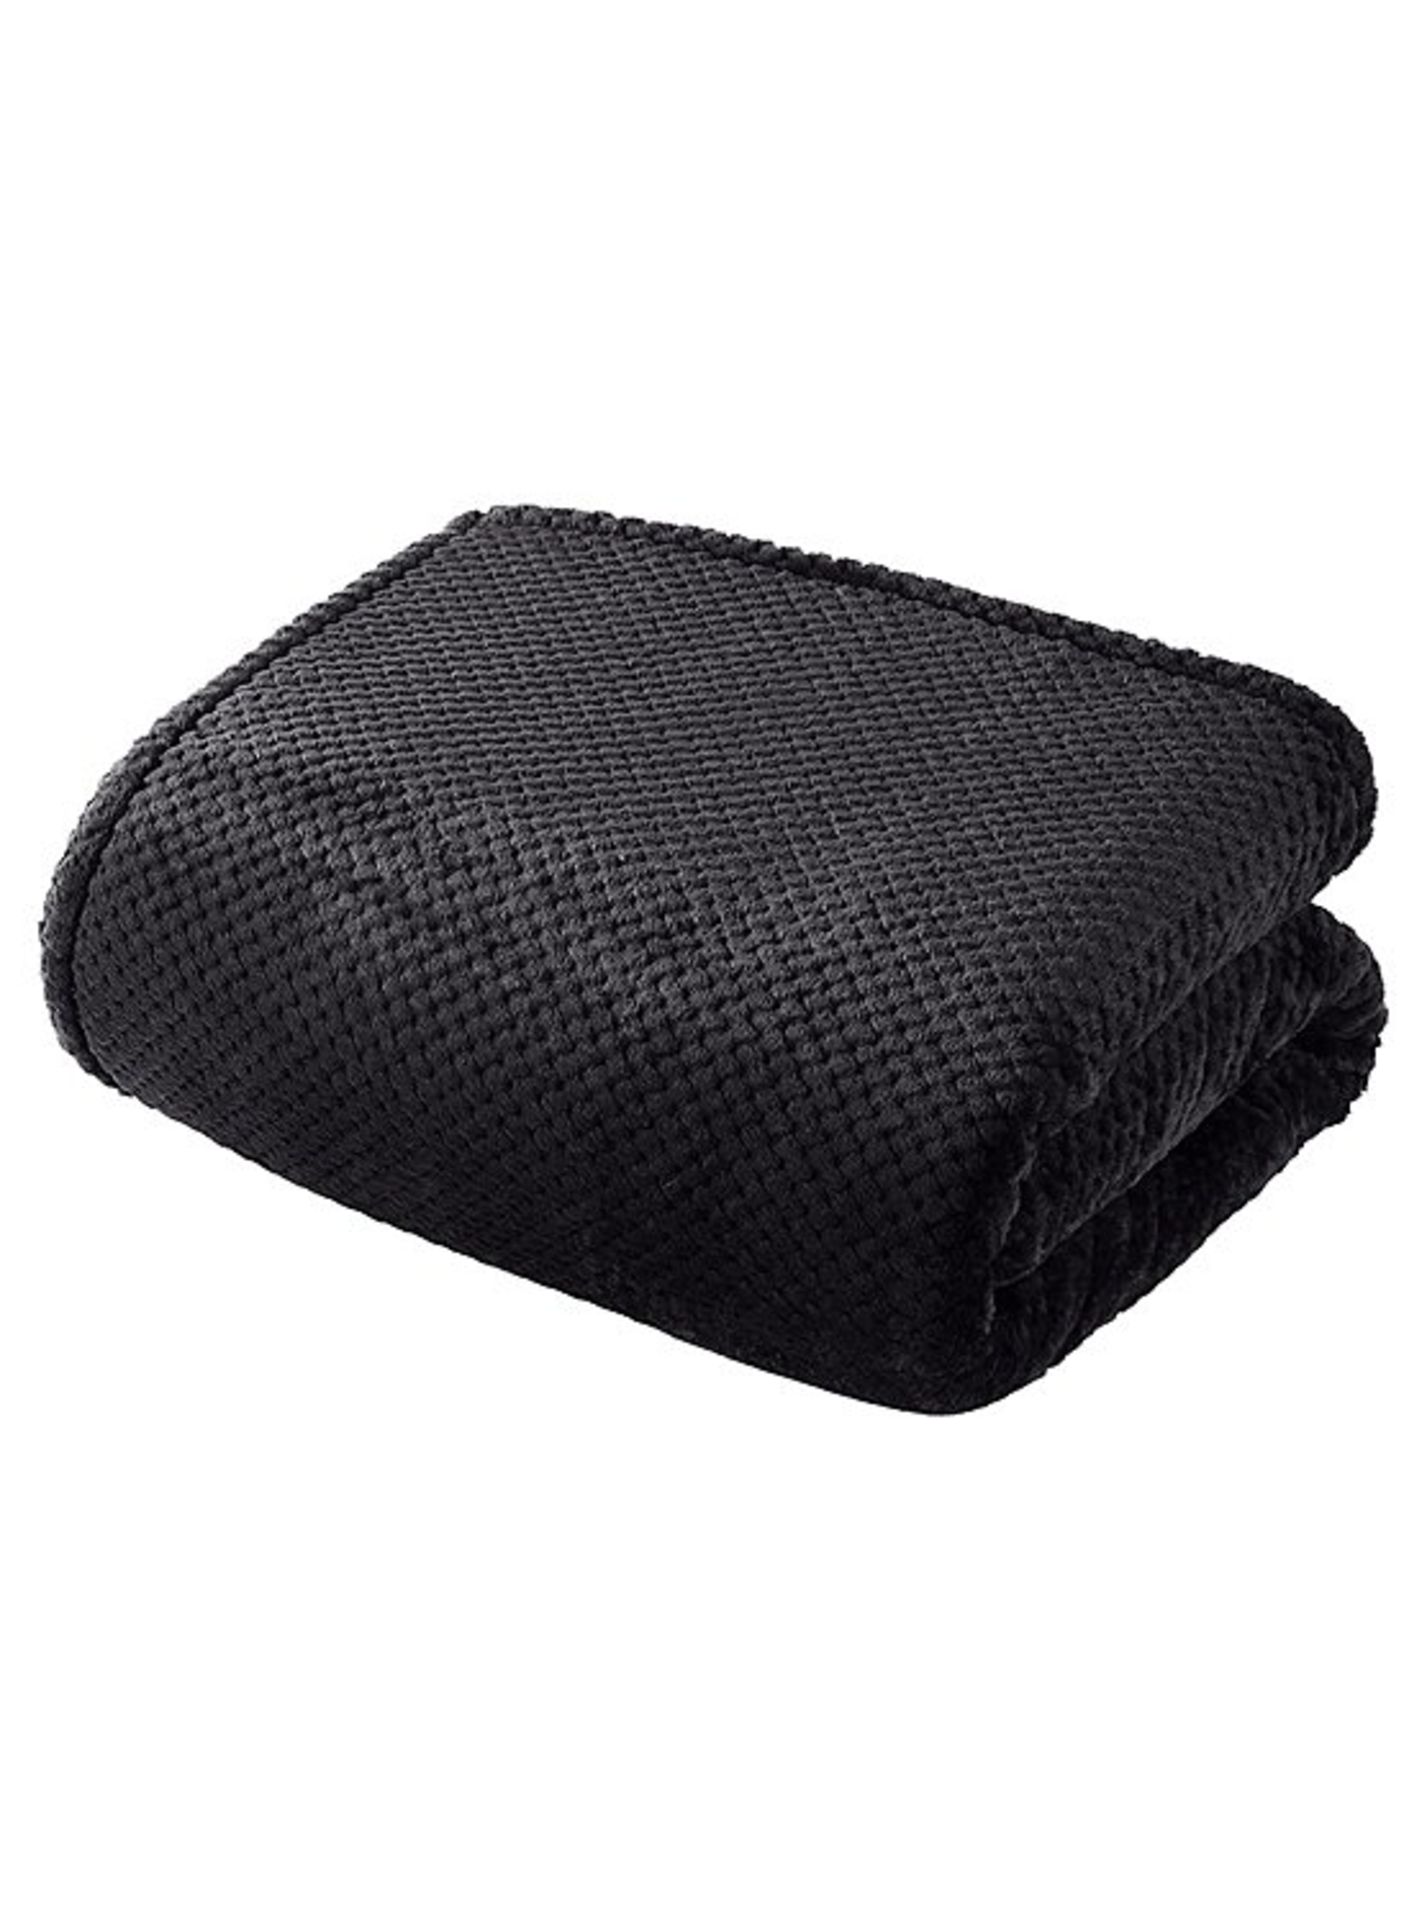 10x NEW & PACKAGED SLEEPDOWN Cosy Collection Soft Touch Waffle Fleece Throw 150 x 200cm - BLACK. RRP - Image 2 of 2